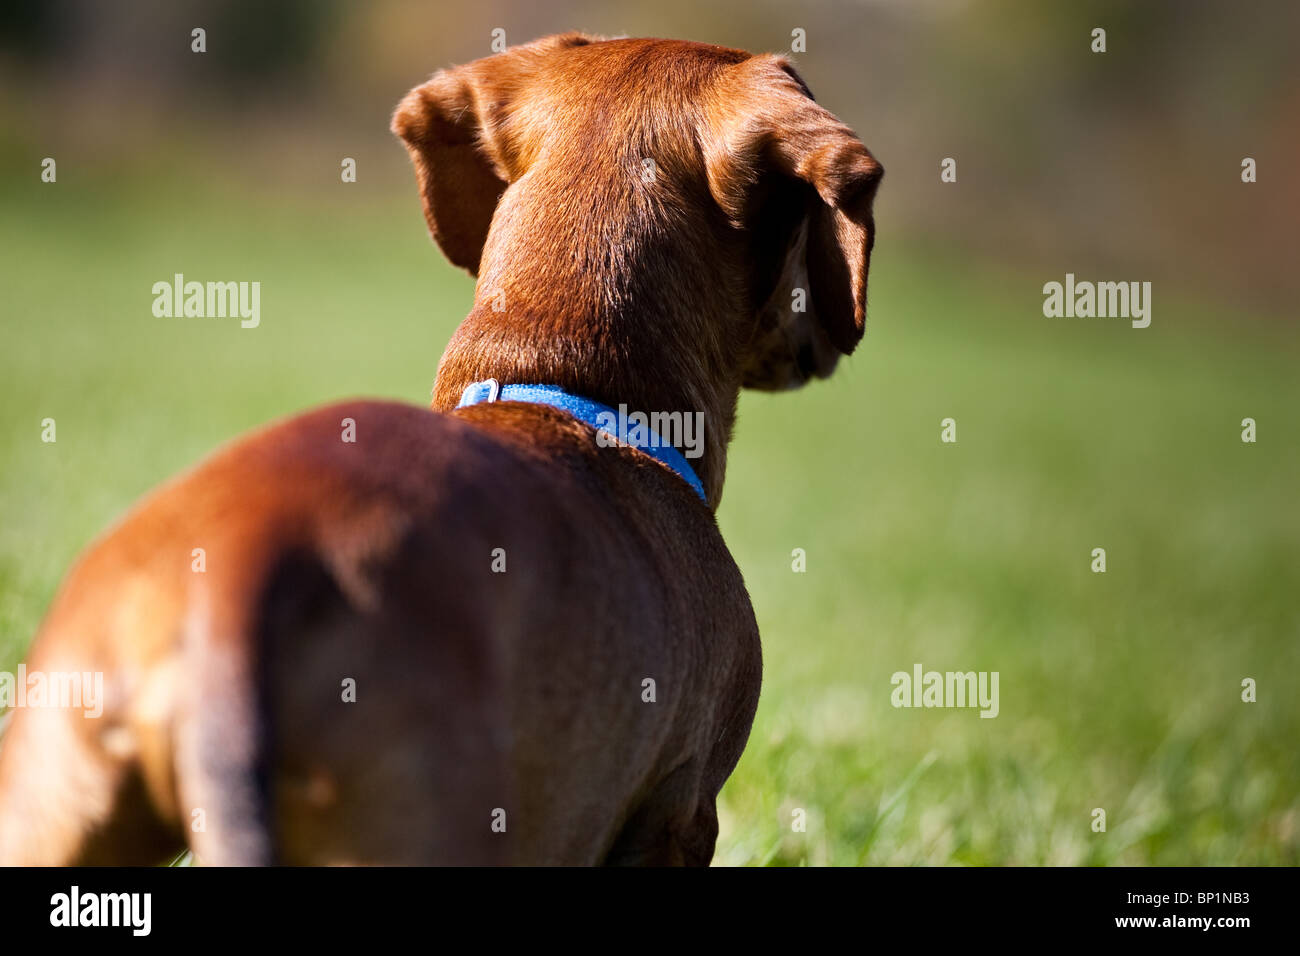 A miniature Dachshund, taken from behind, as he surveys his surroundings. Stock Photo